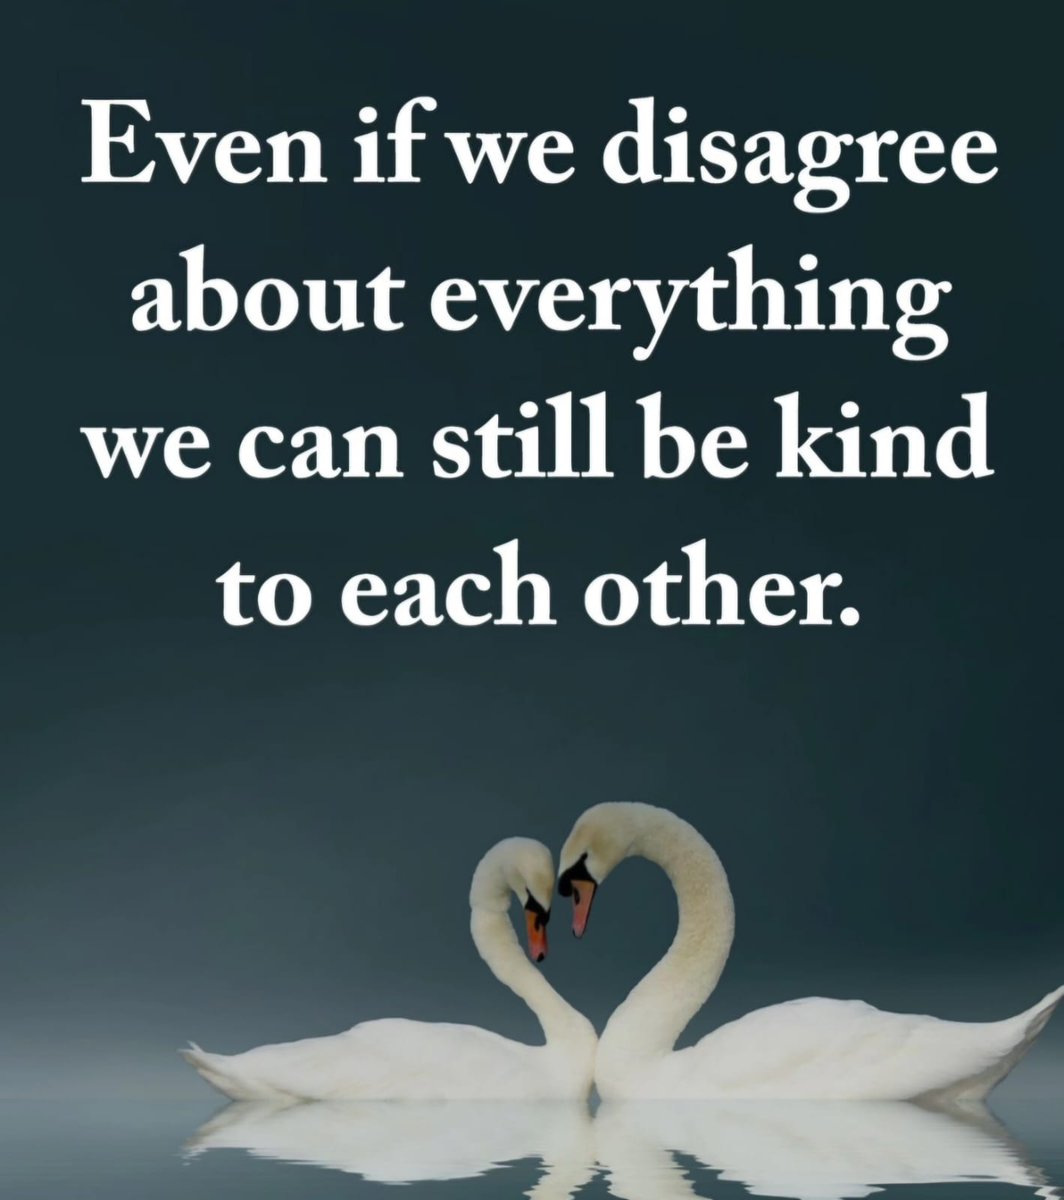 Even if we #DisagreeOnEverything, we can still choose to #BeKindToEachOther. Differences are inevitable, but #Kindness and #Respect should be non-negotiable. #AgreeToDisagreePeacefully #FindingCommonGround #Empathy #Civility #BuildBridgesNotWalls